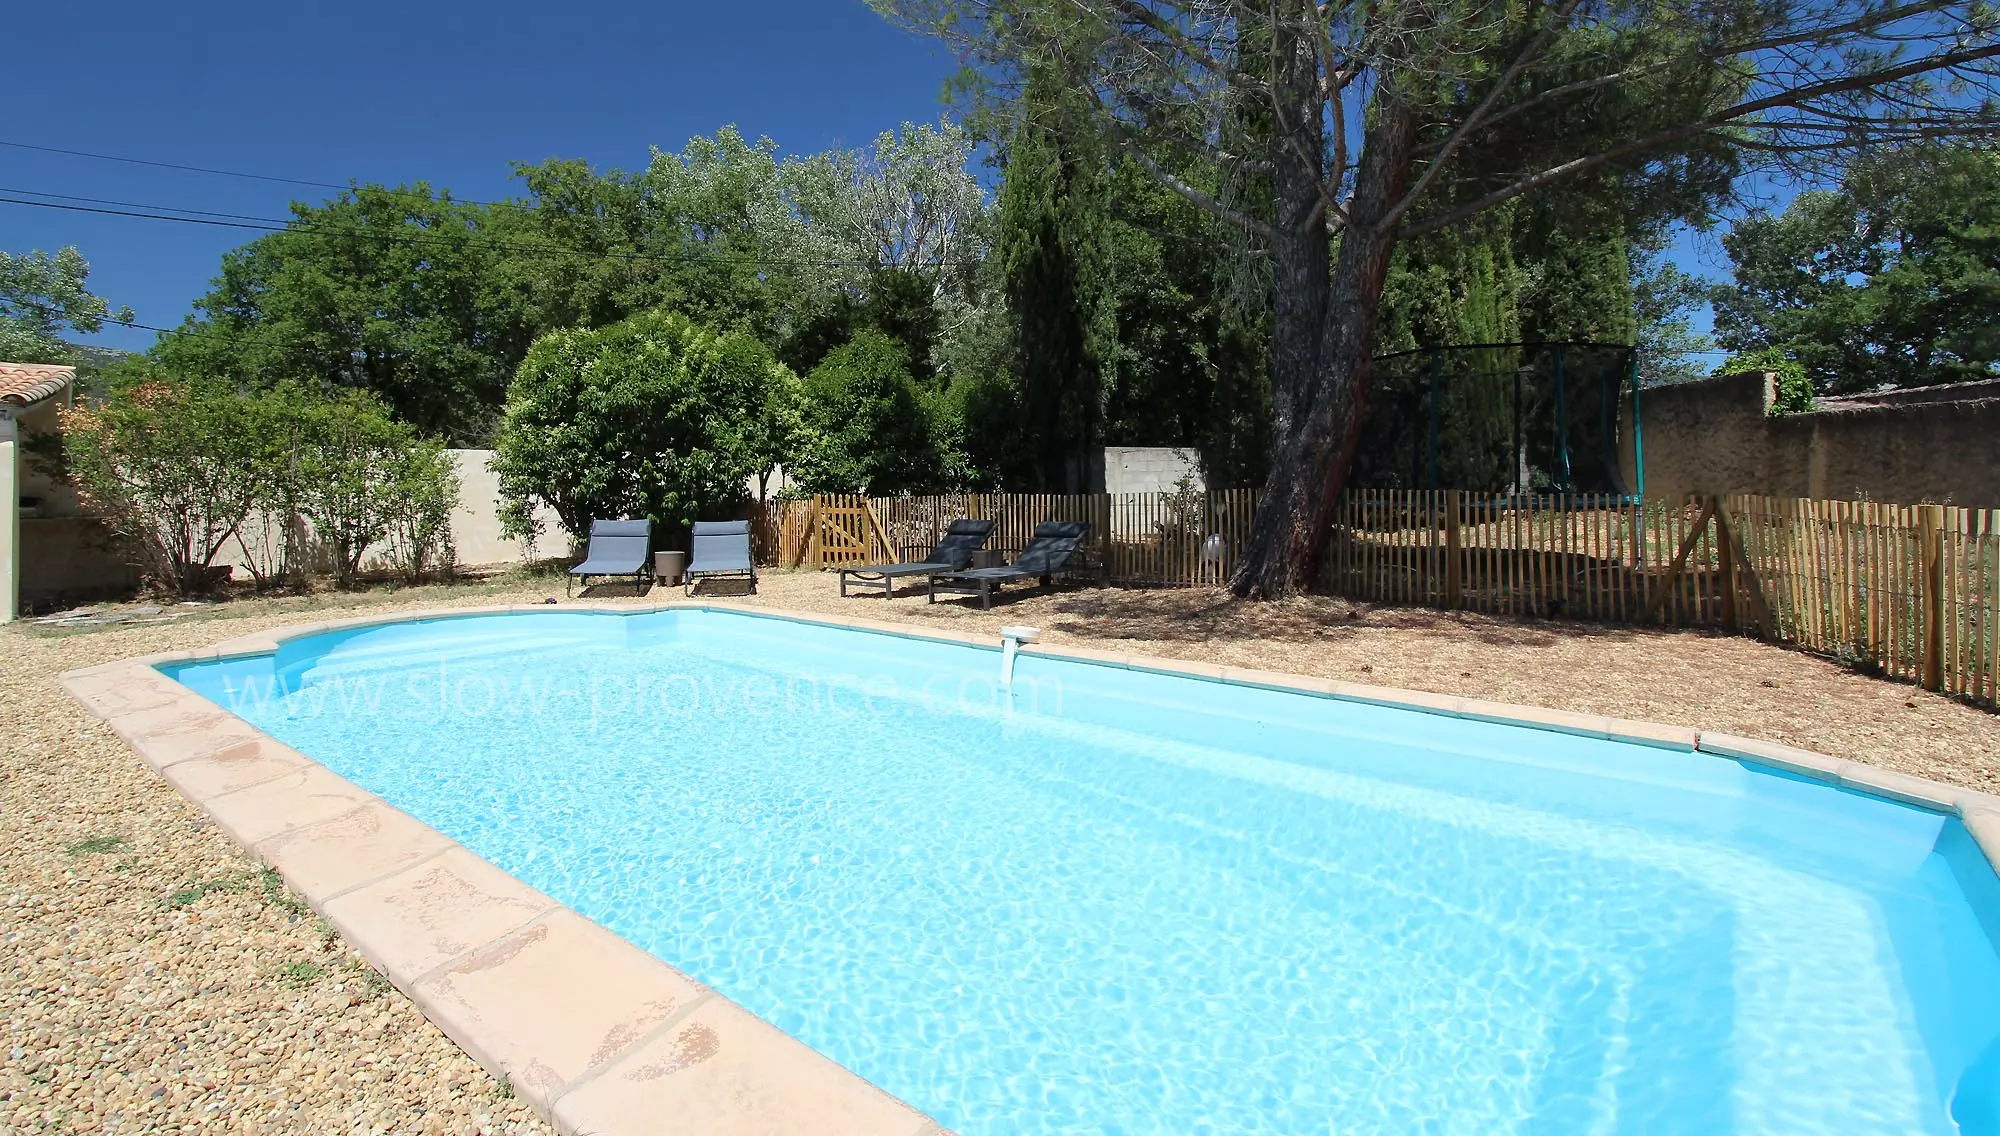 Villa close to the village, with a large fenced garden and heated pool